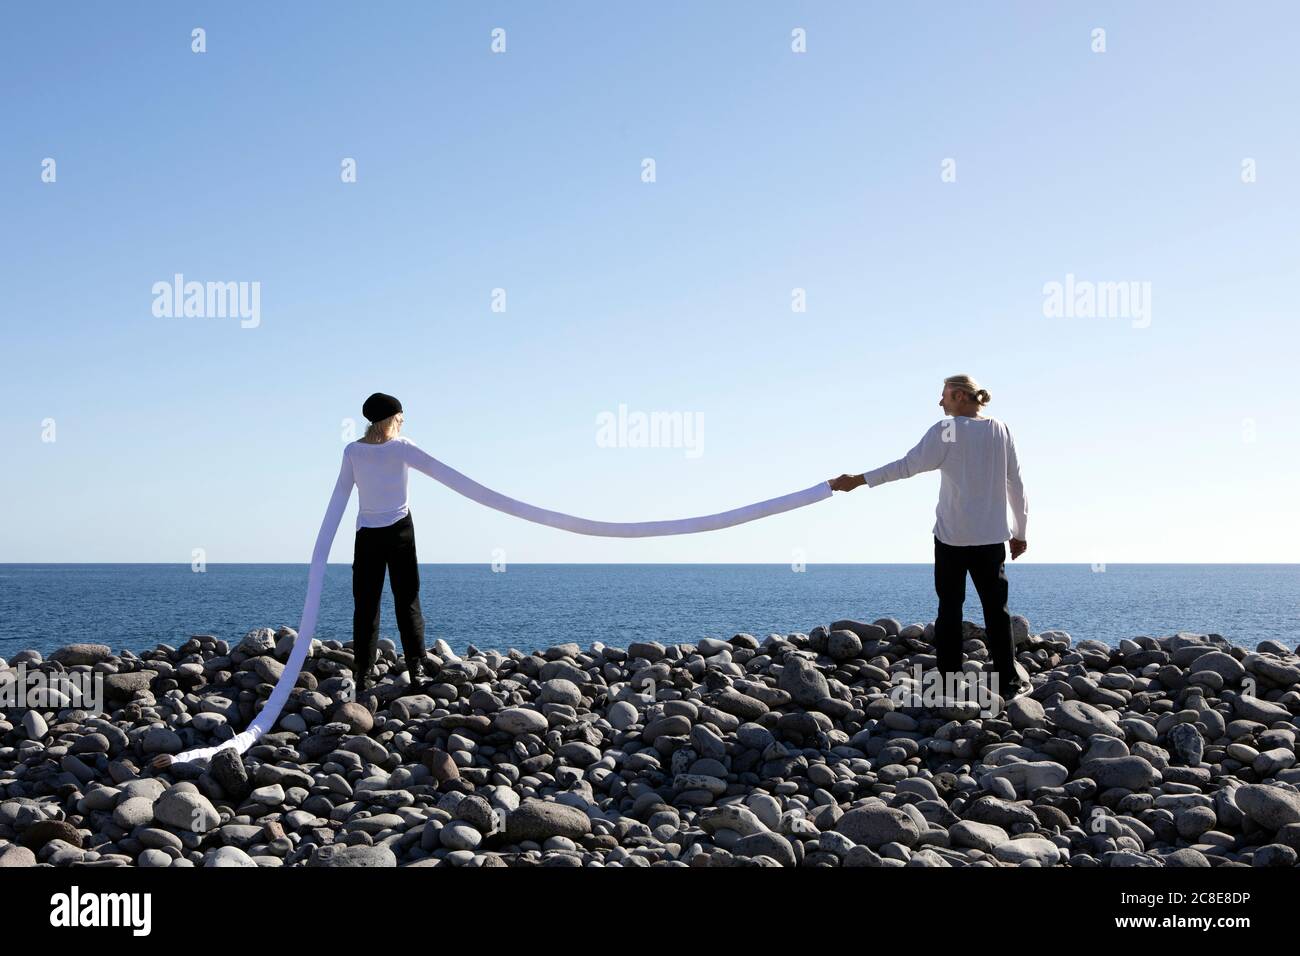 Woman with long artificial arms holding man's hand at beach against clear sky Stock Photo